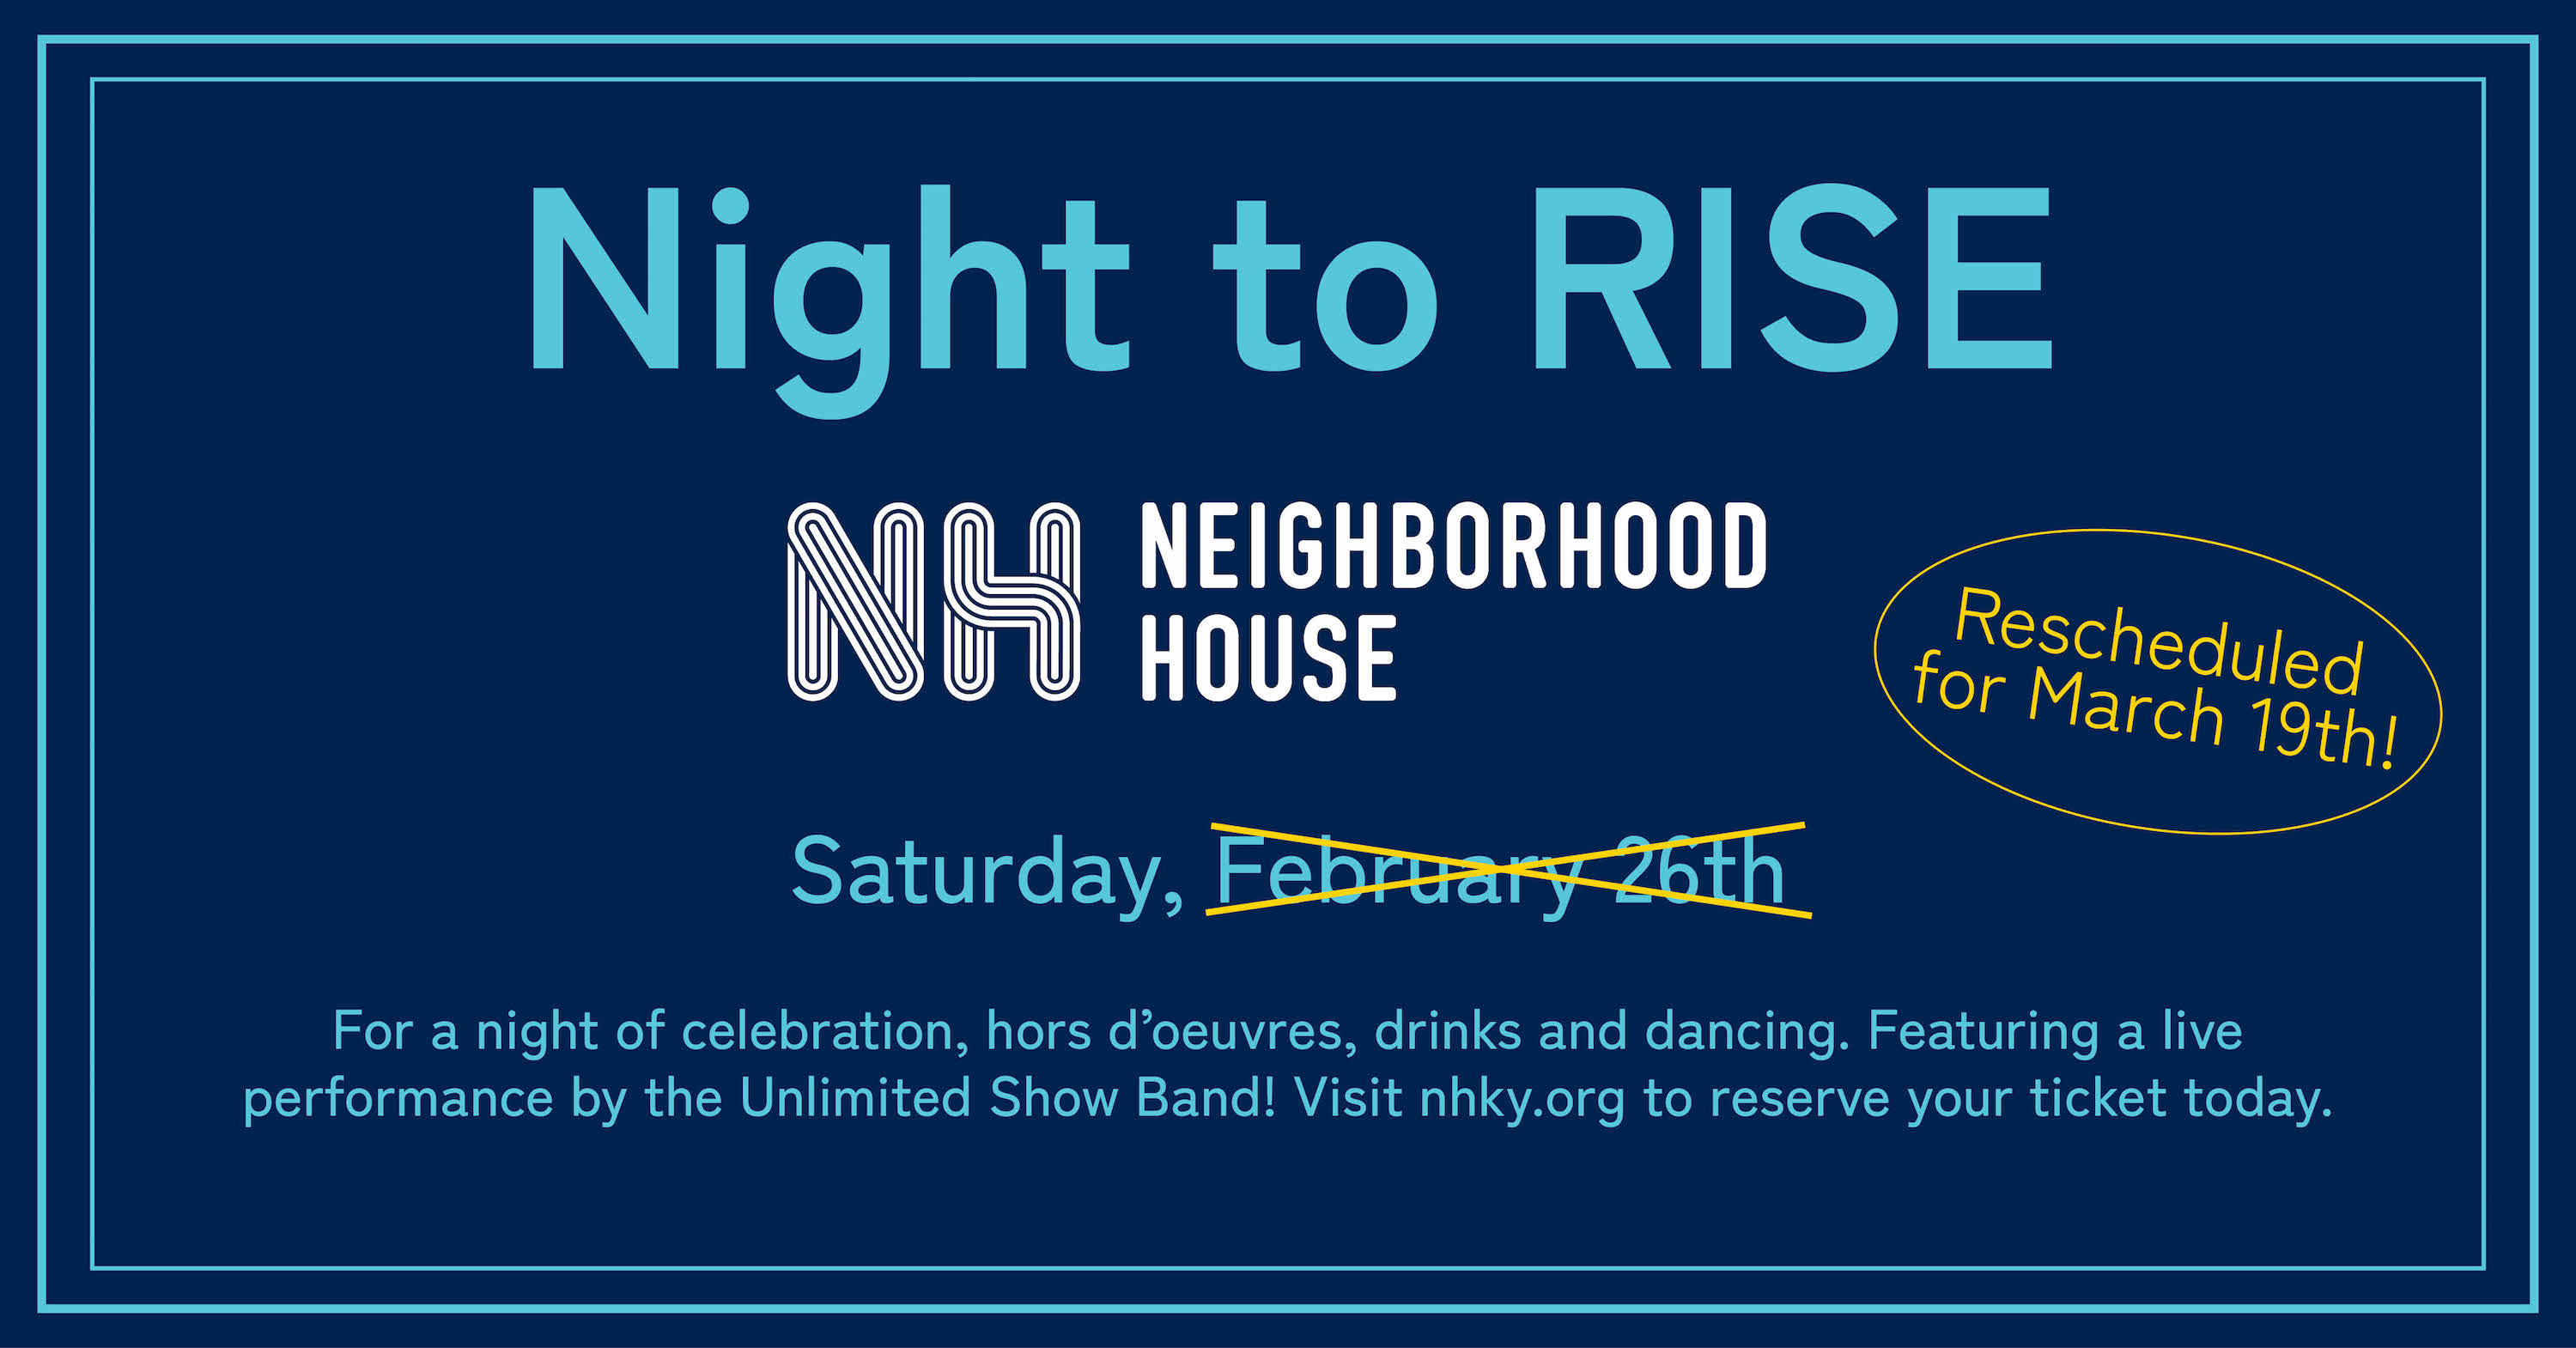 Join us for Night to RISE Image